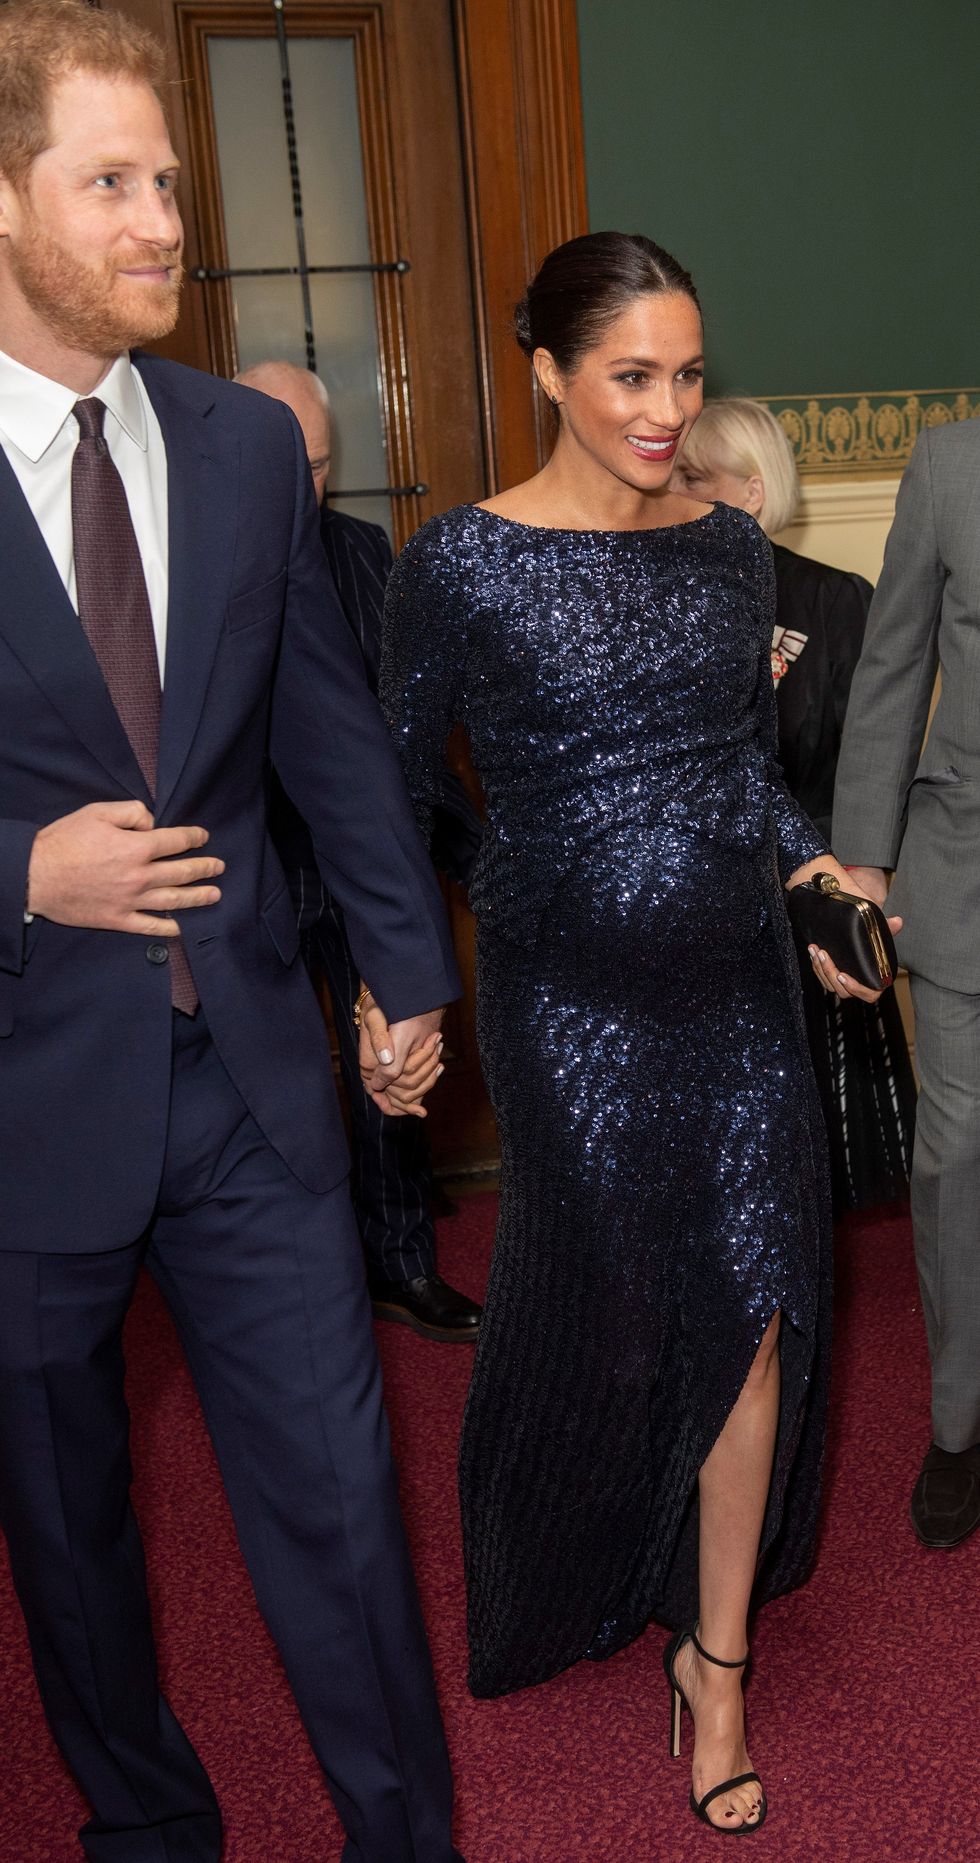 prince harry and meghan, the duchess of sussex at royal albert hall on january 16, 2019